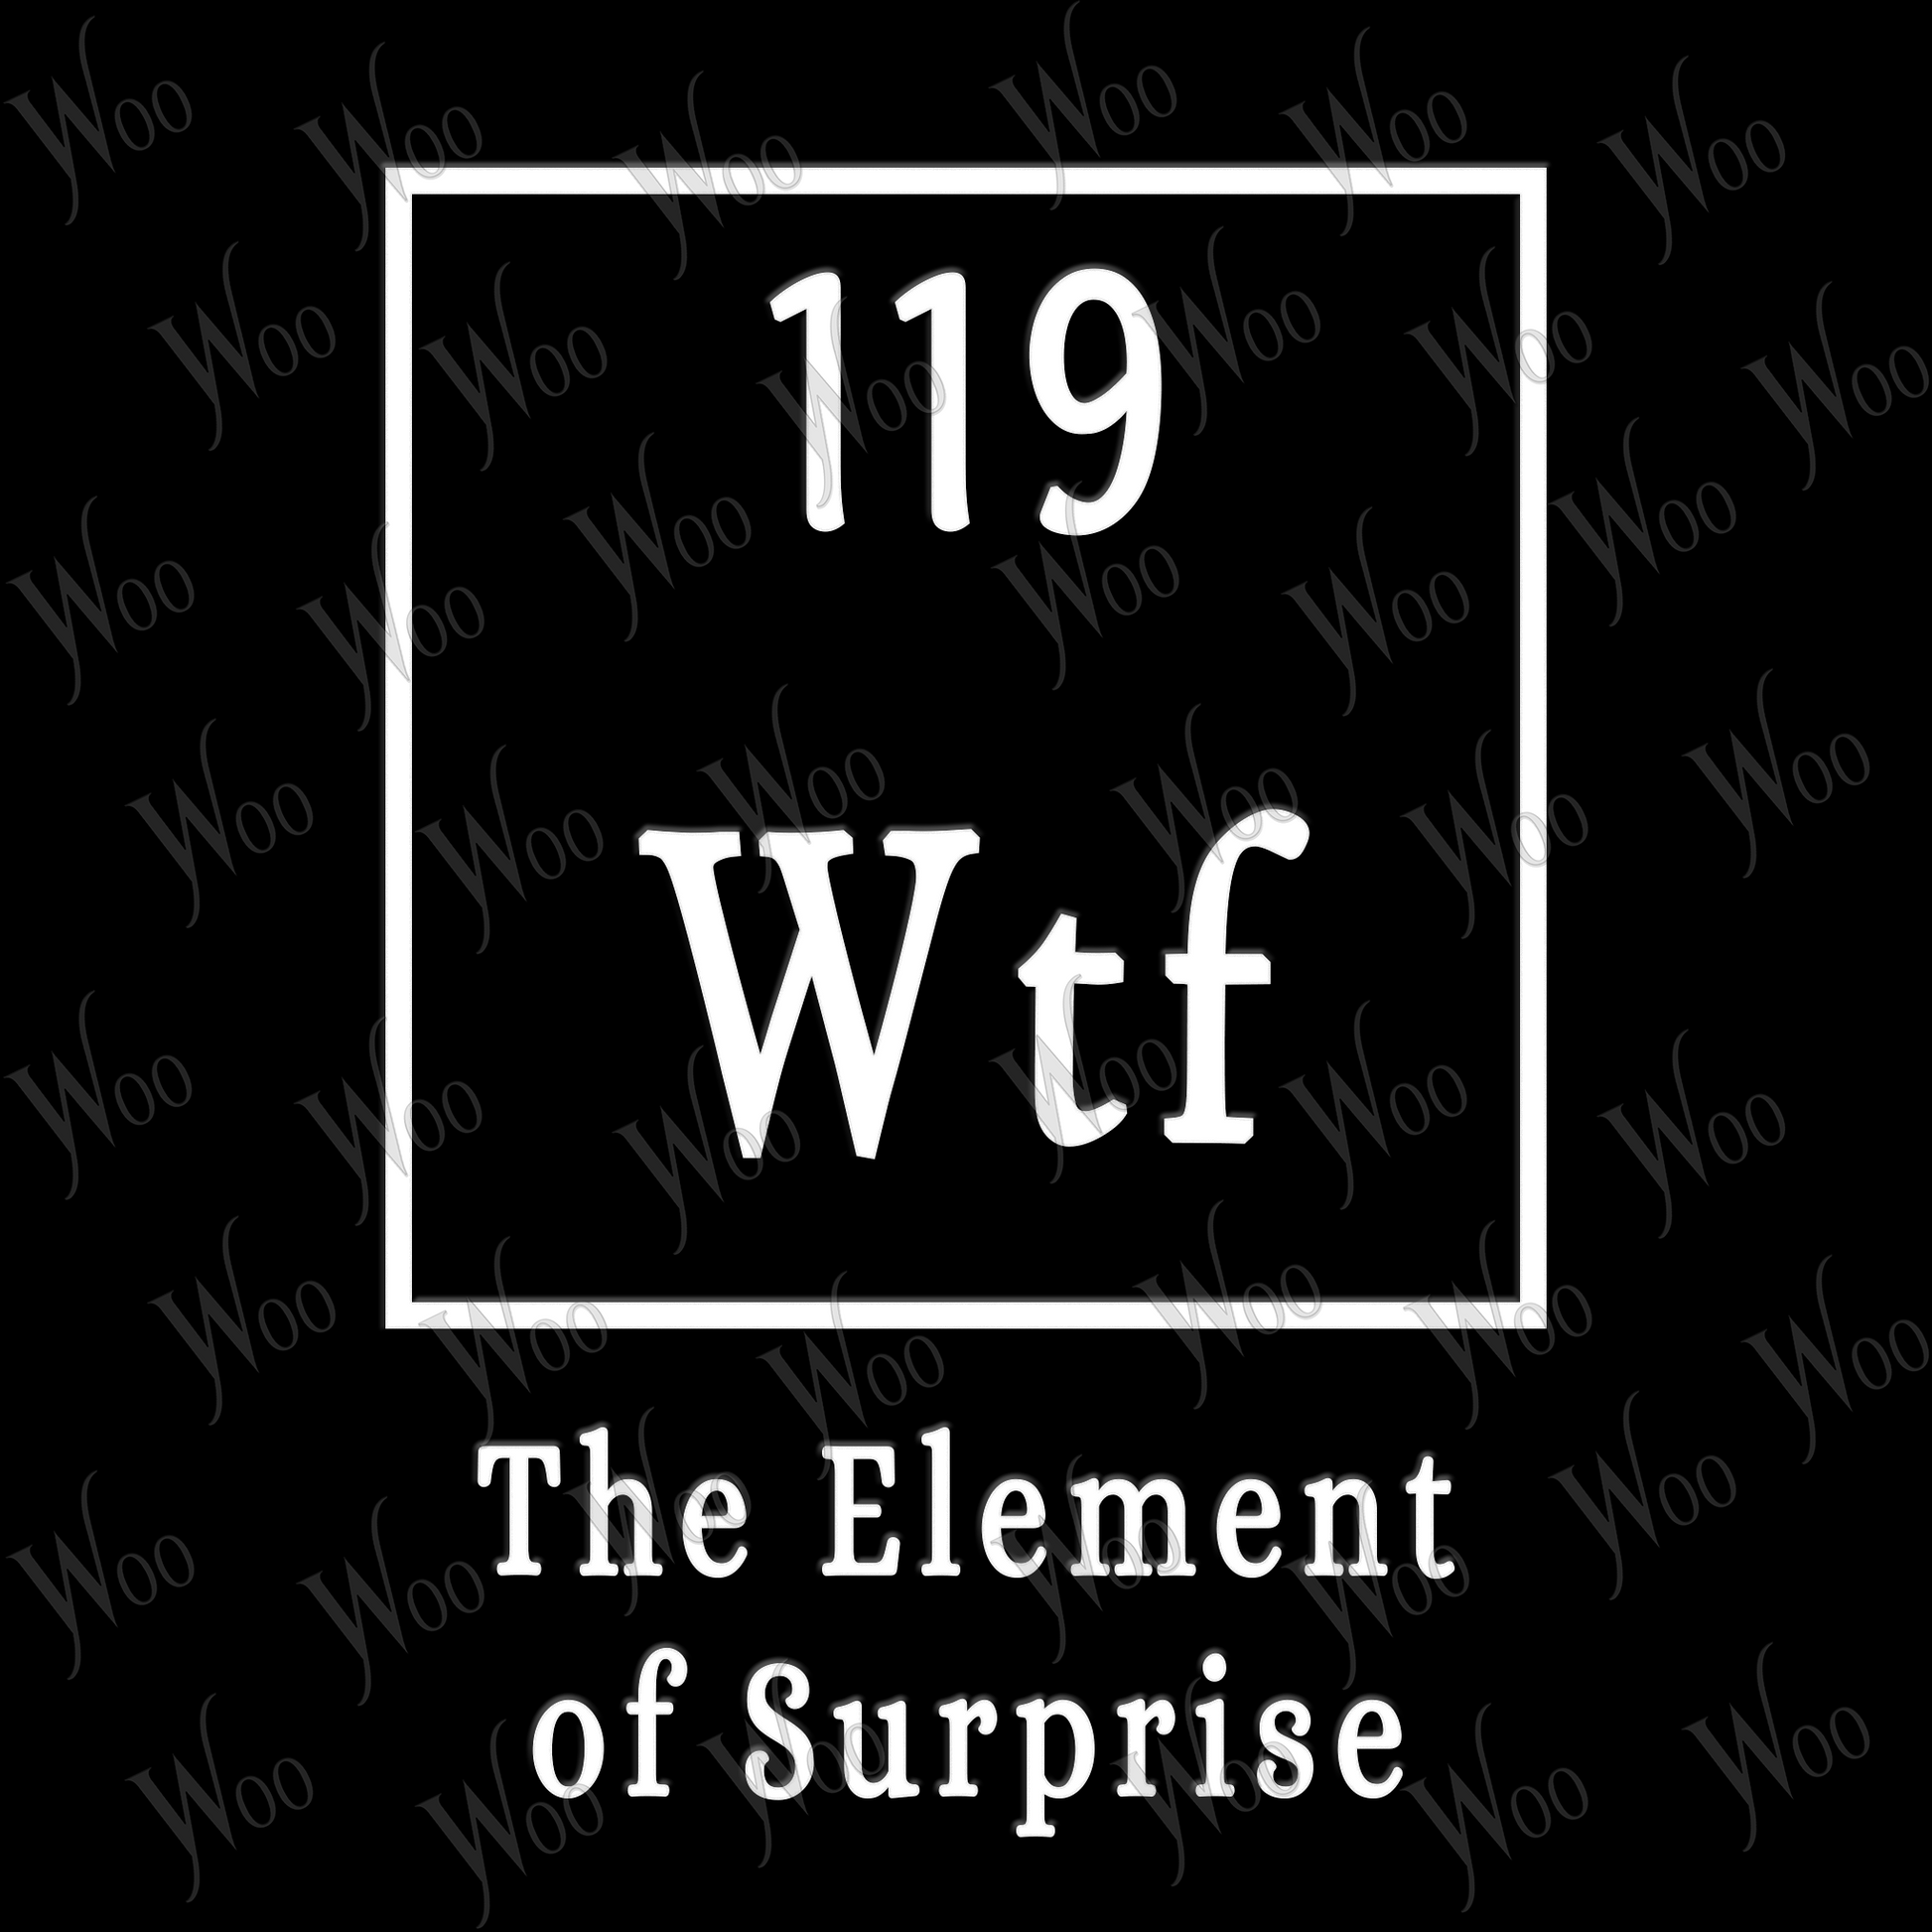 Wtf - The Element of Surprise